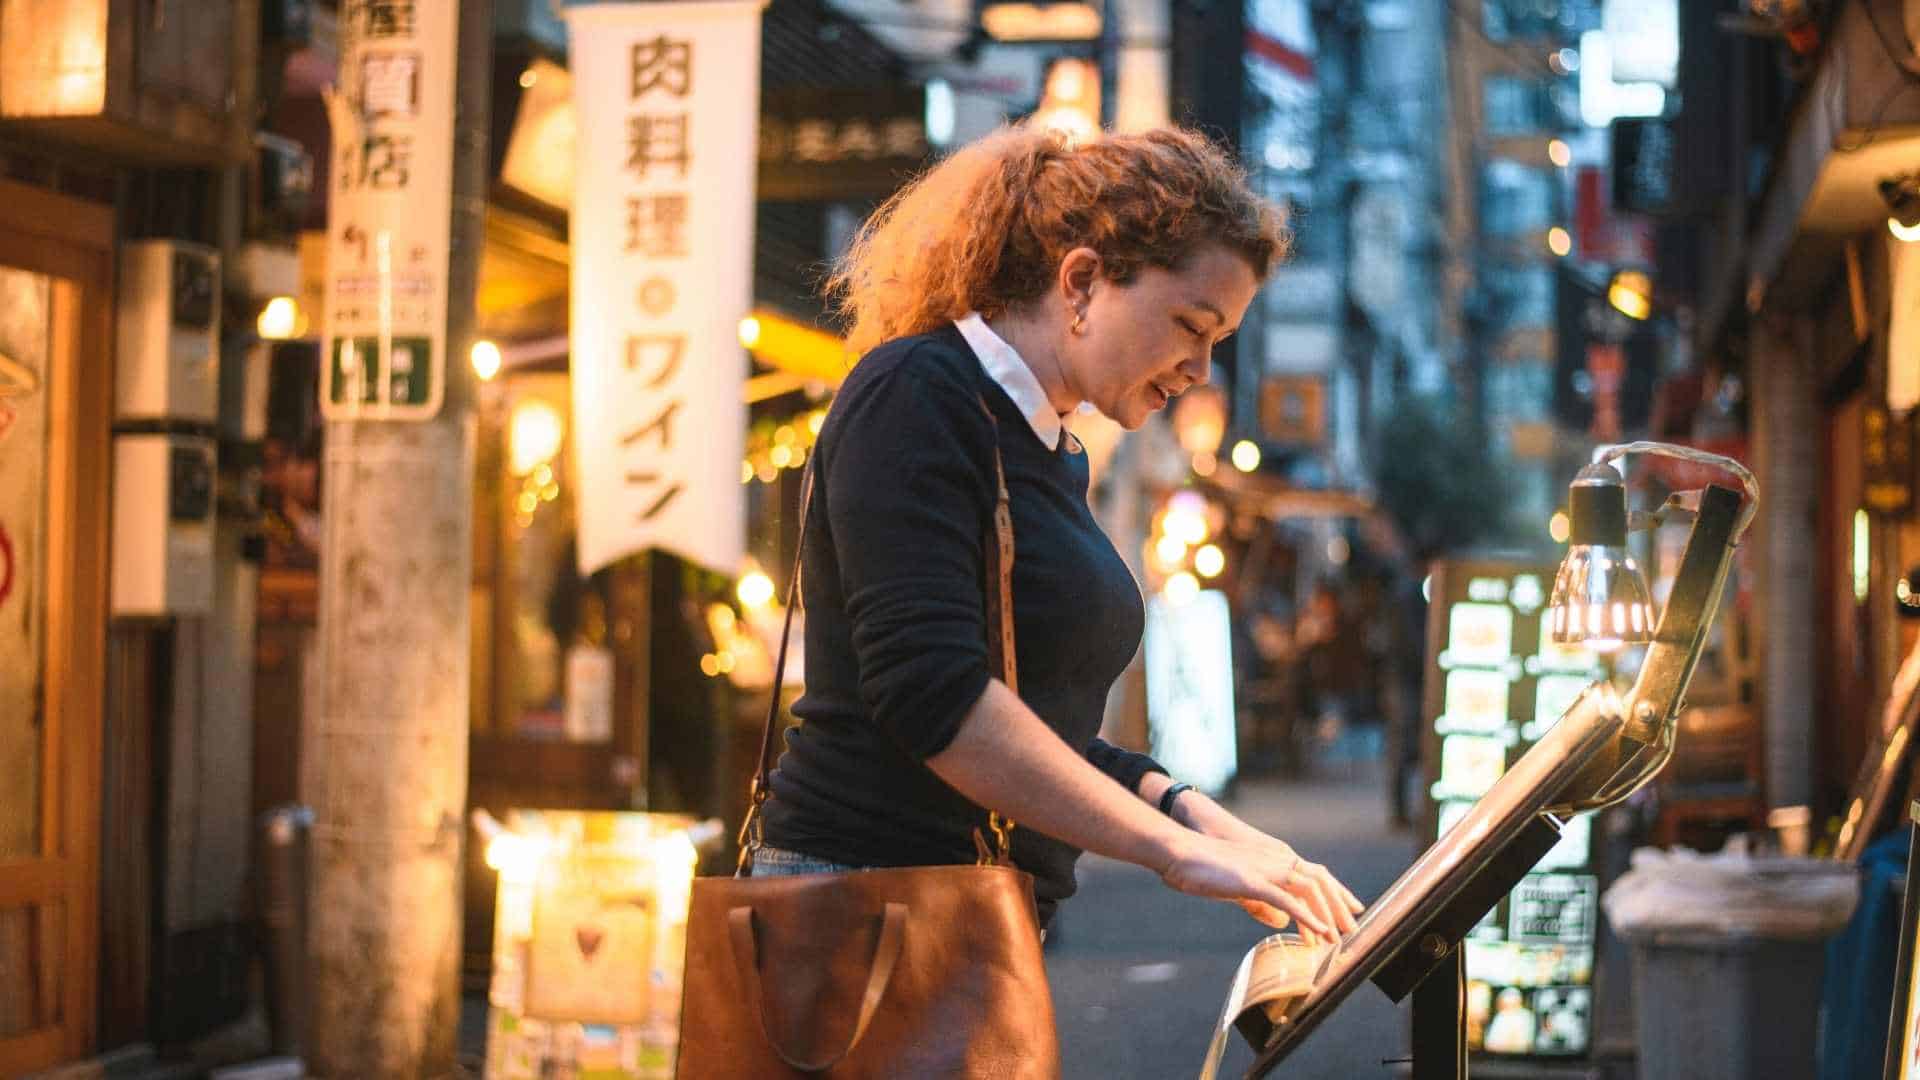 Best Drunk Food for your night out in Japan